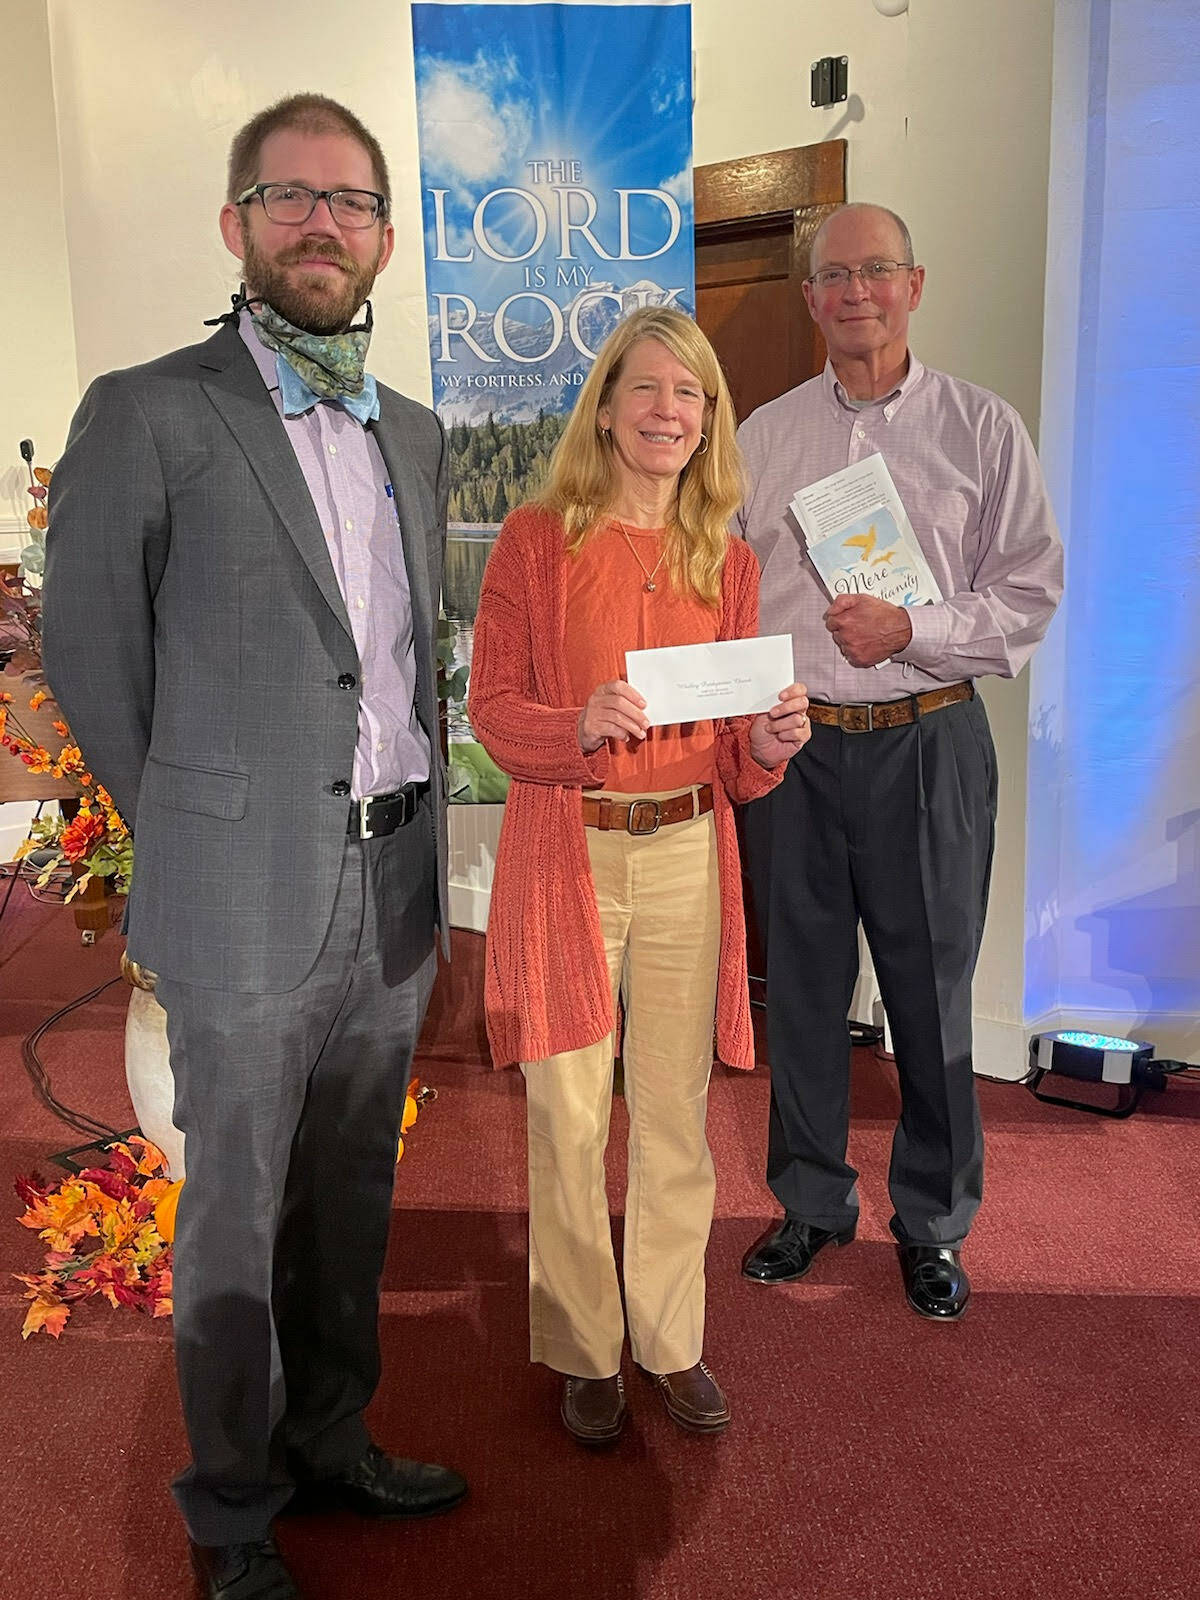 Photo provided
Pastor Greg Steible, left, and church stewardship chair Jim Rohrback present Mother Mentors Director Kate McVay with a check for $10,000 on Sept. 12.